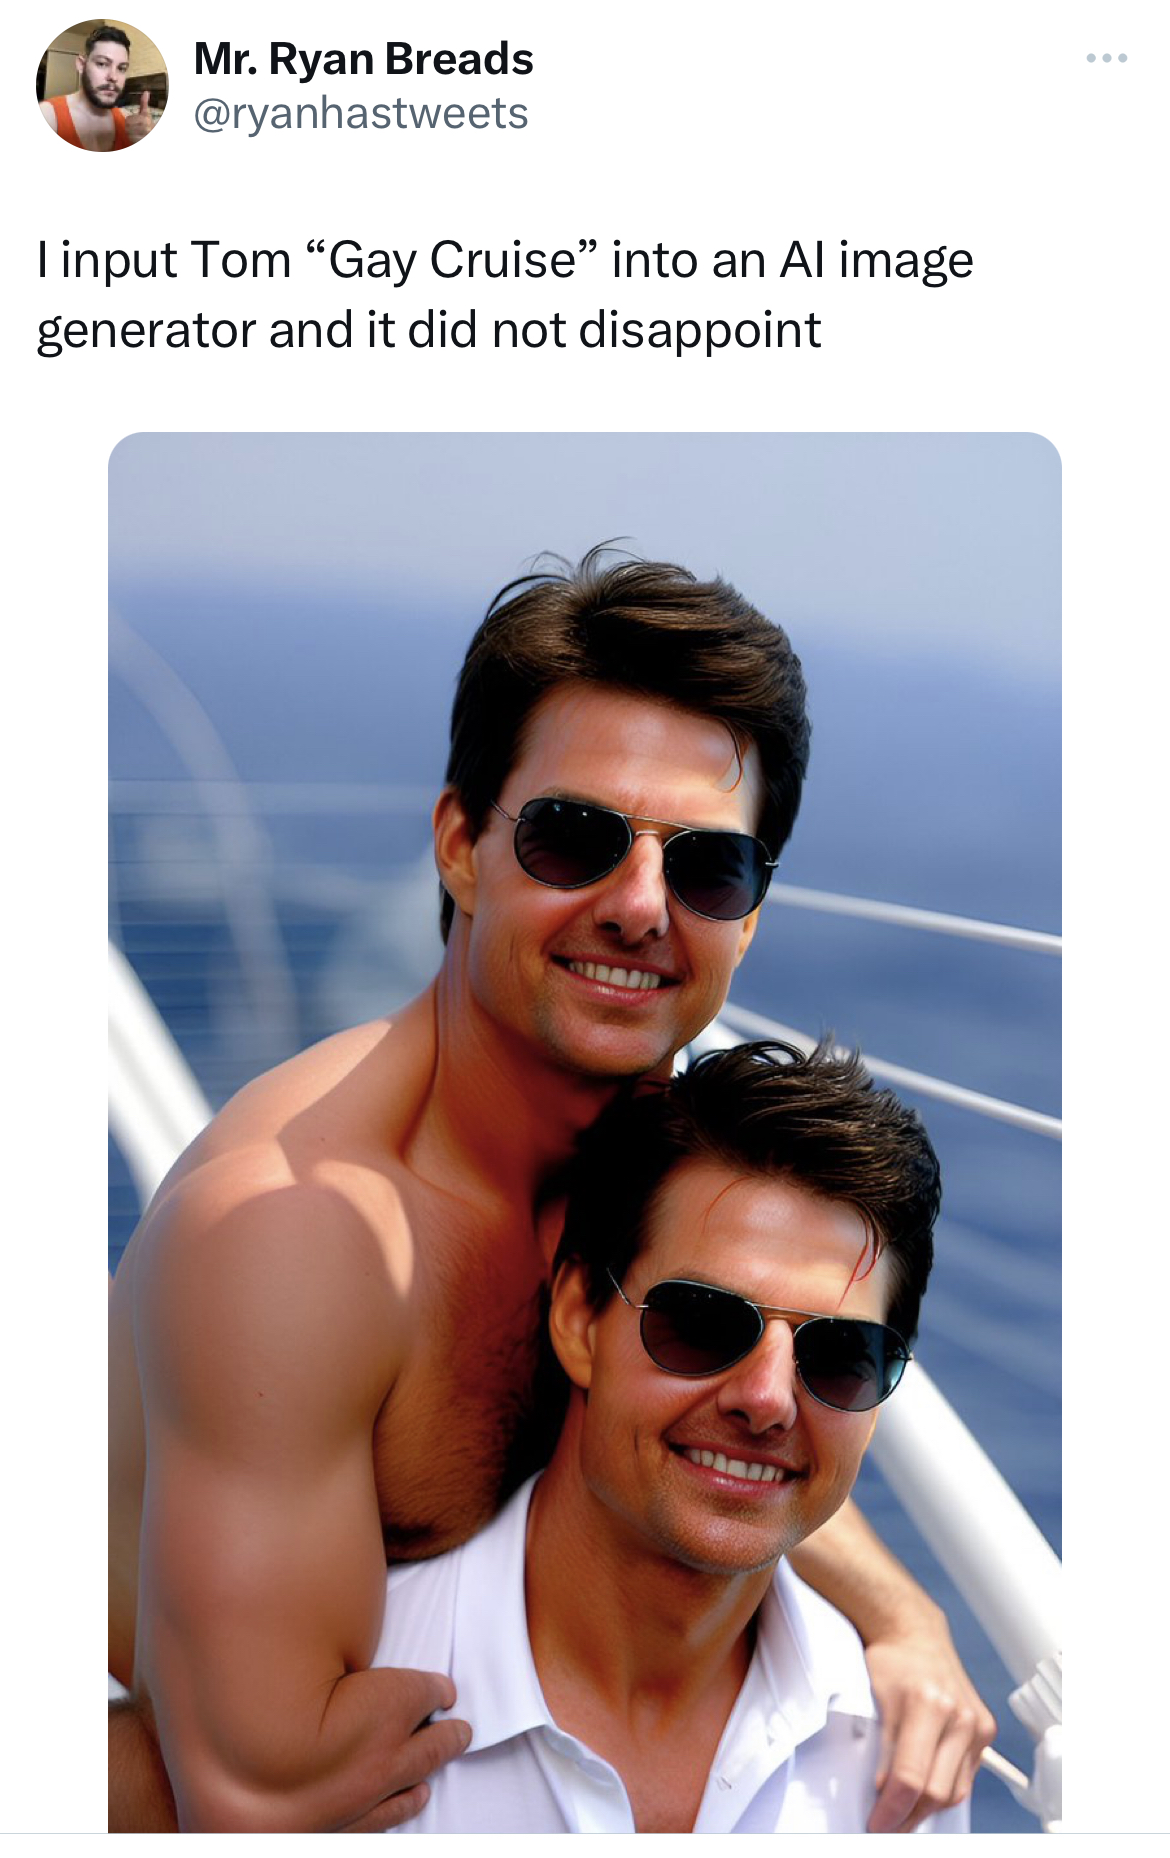 savage tweets - sunglasses - Mr. Ryan Breads I input Tom "Gay Cruise" into an Al image generator and it did not disappoint